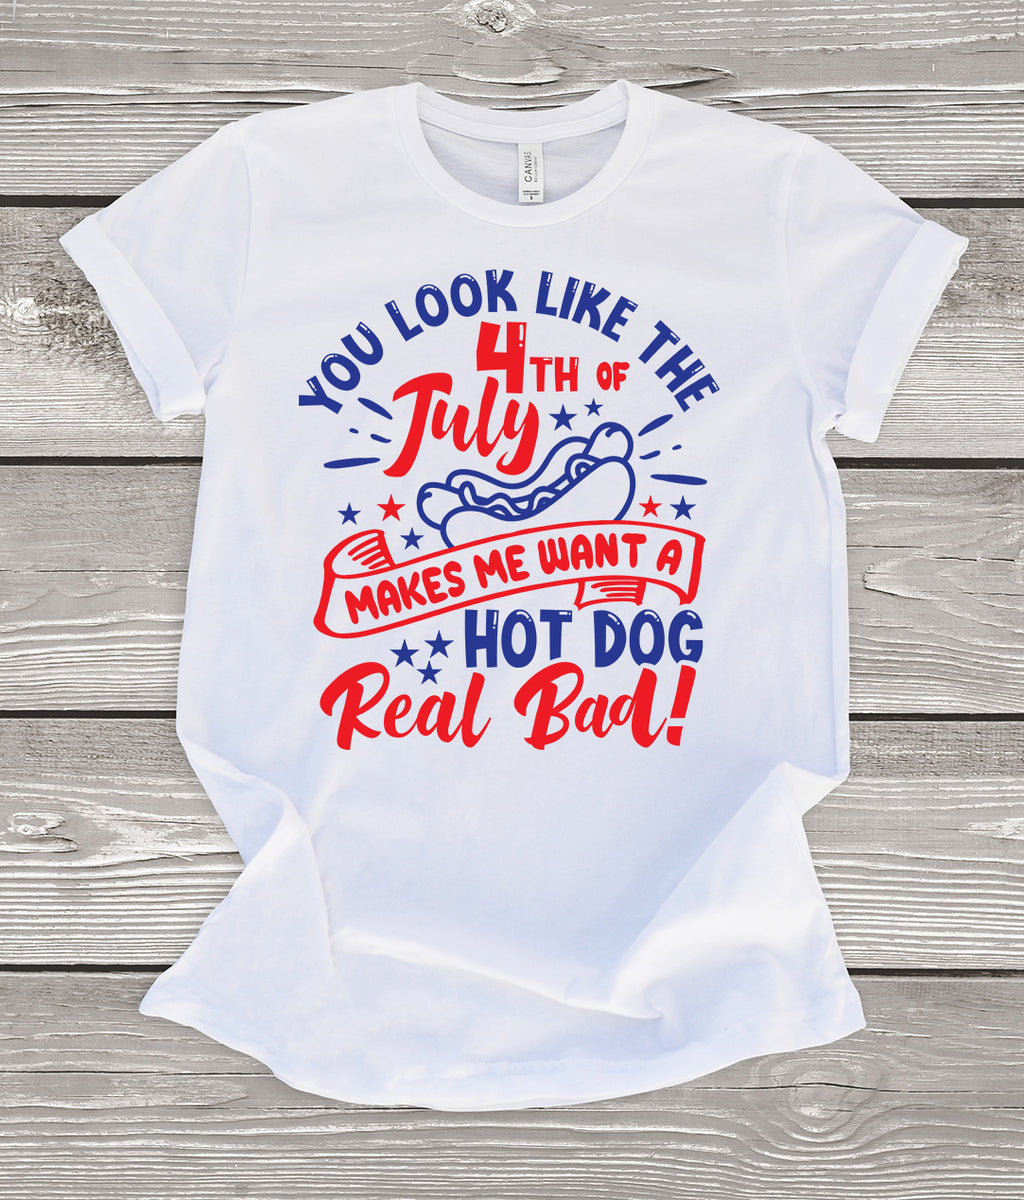 You Look Like The 4th of July Makes Me Want a Hot Dog Real Bad White T-Shirt